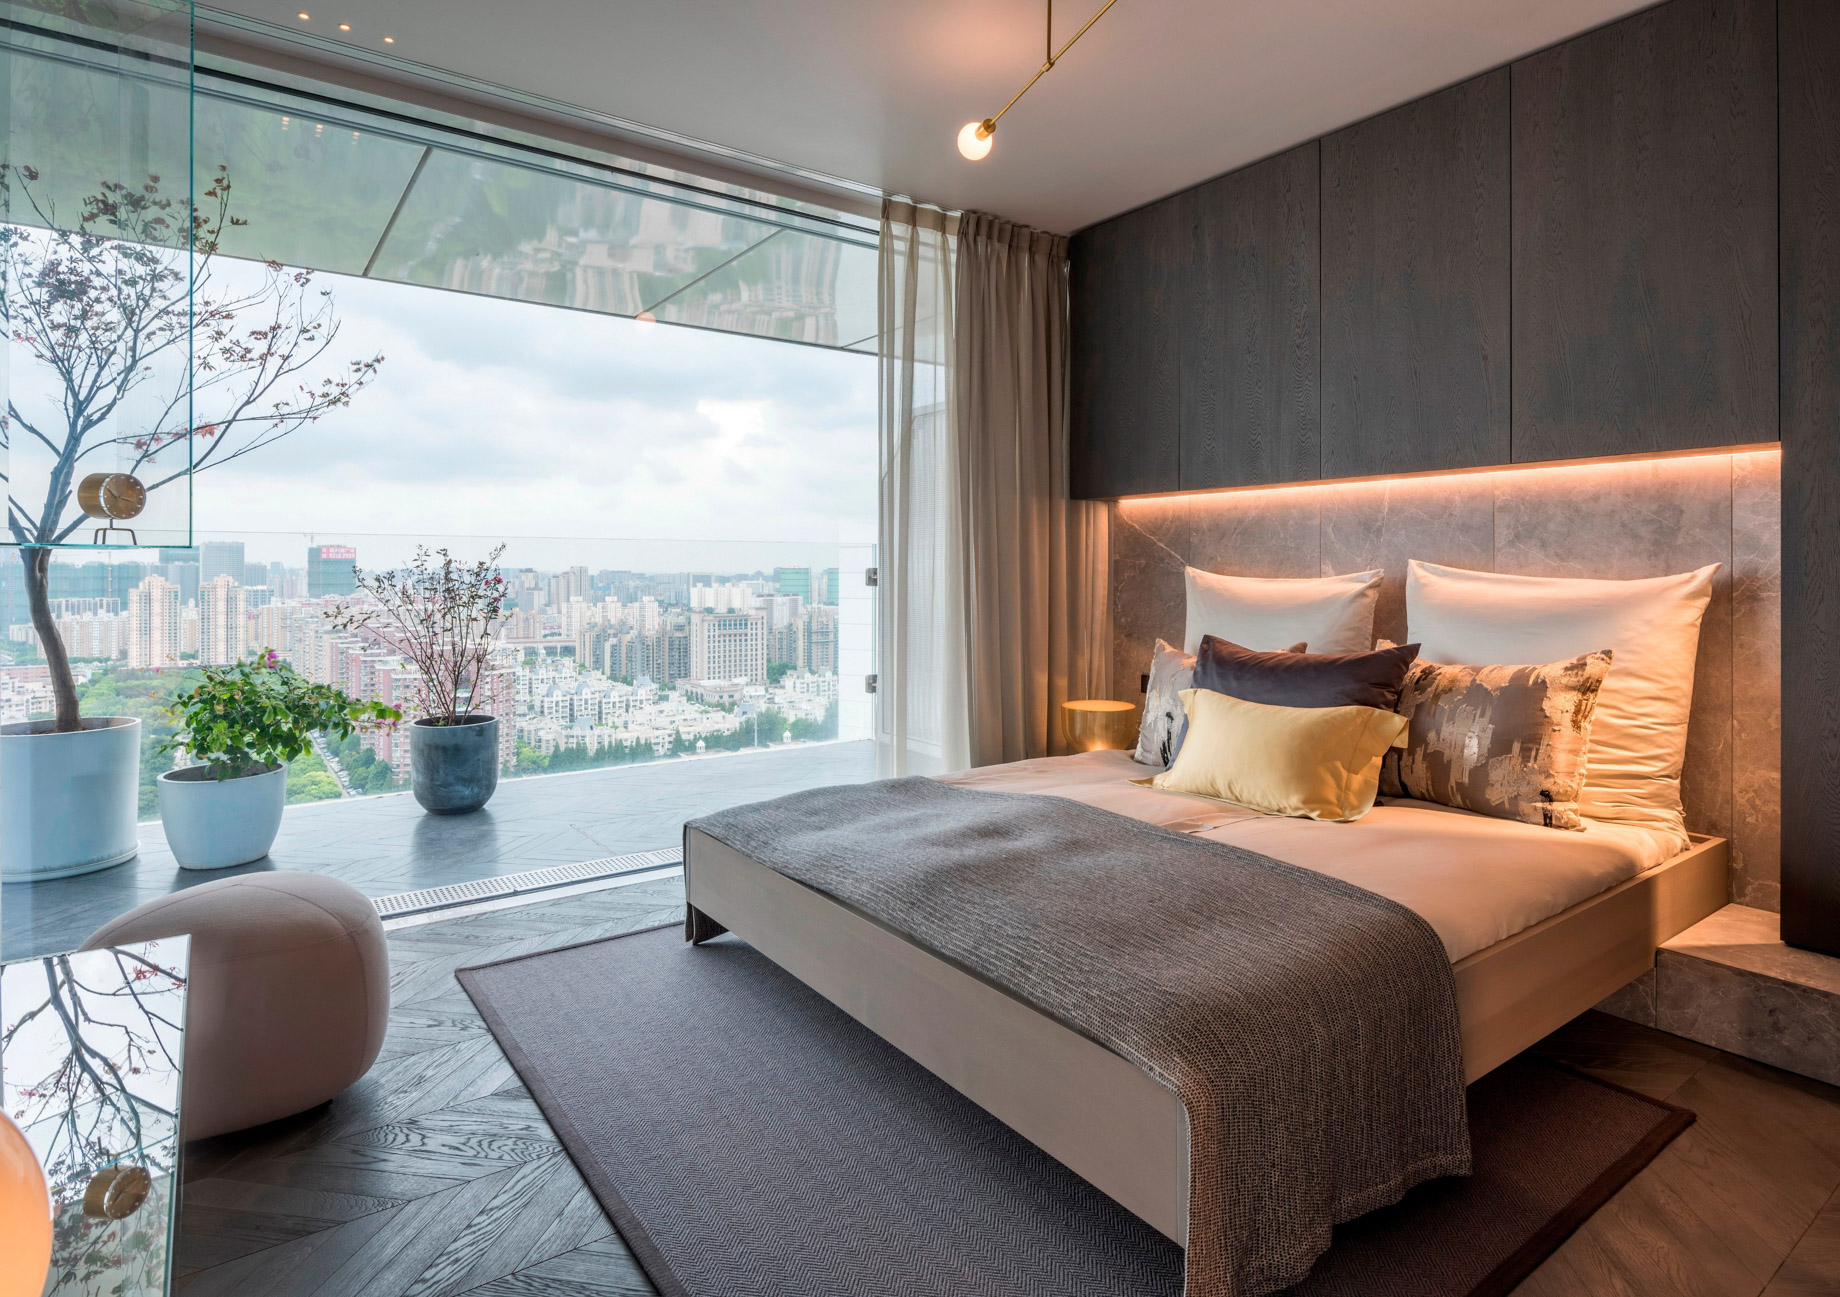 Shades of Grey Apartment Interior Design Shanghai, China – Ippolito Fleitz Group – Bedroom Floor to Ceiling Window View